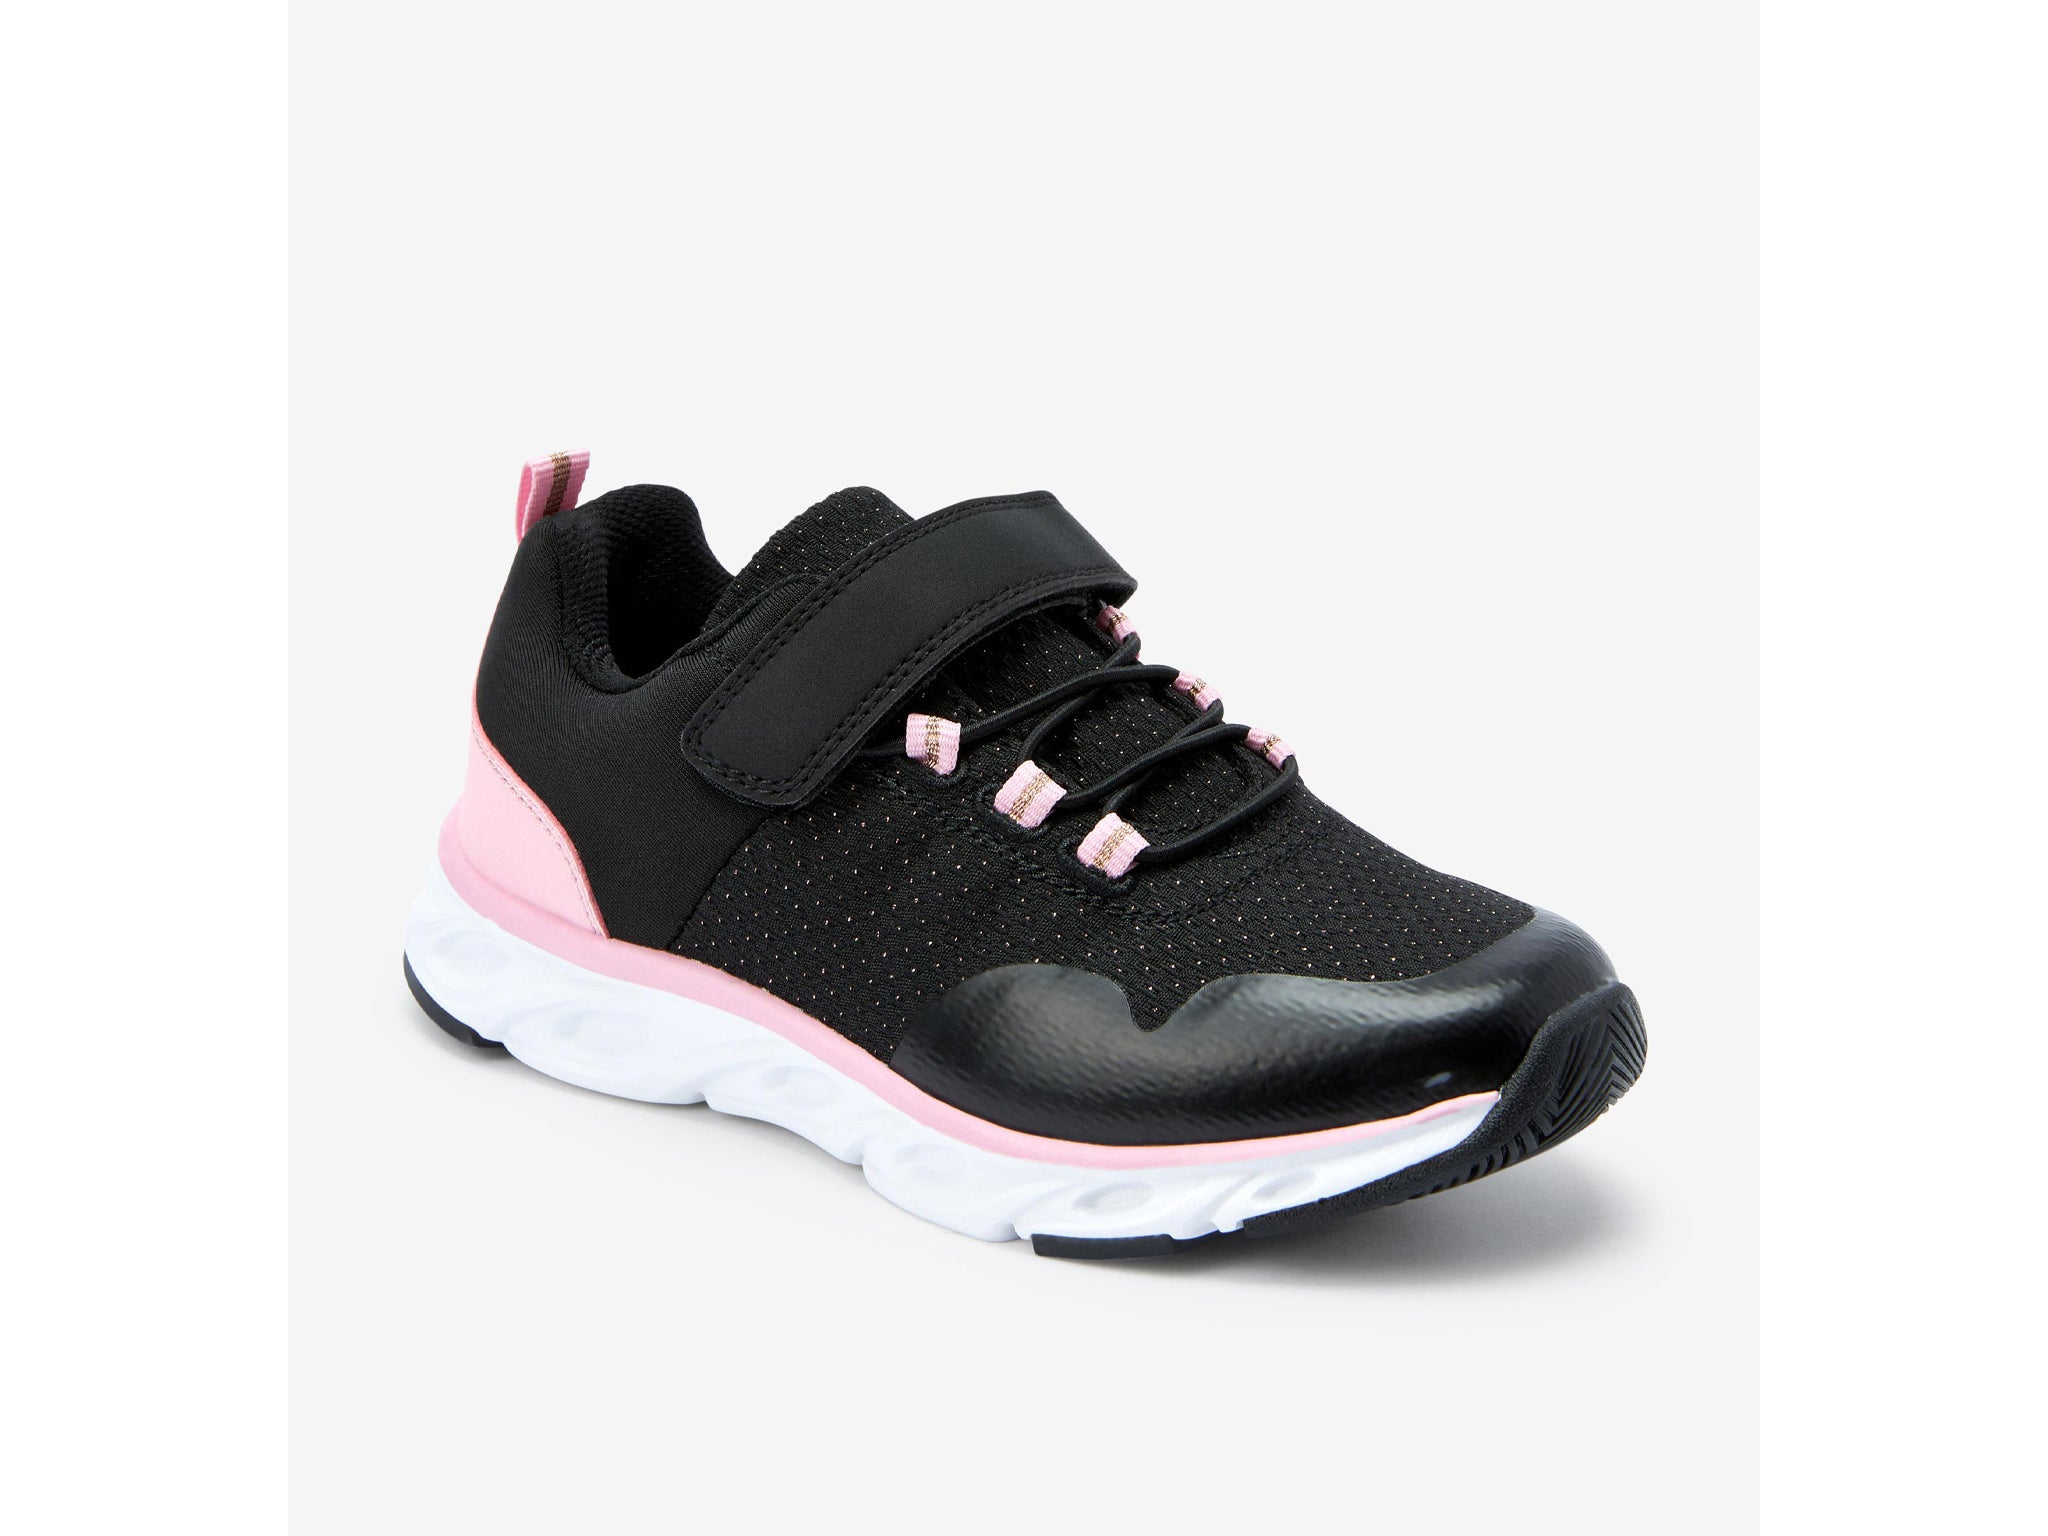 GladRags Girls Boys Kids Trainers Hook & Loop or Lace Style Breathable PE Sports Size 8 9 10 11 12 13 1 2 3 4 UK